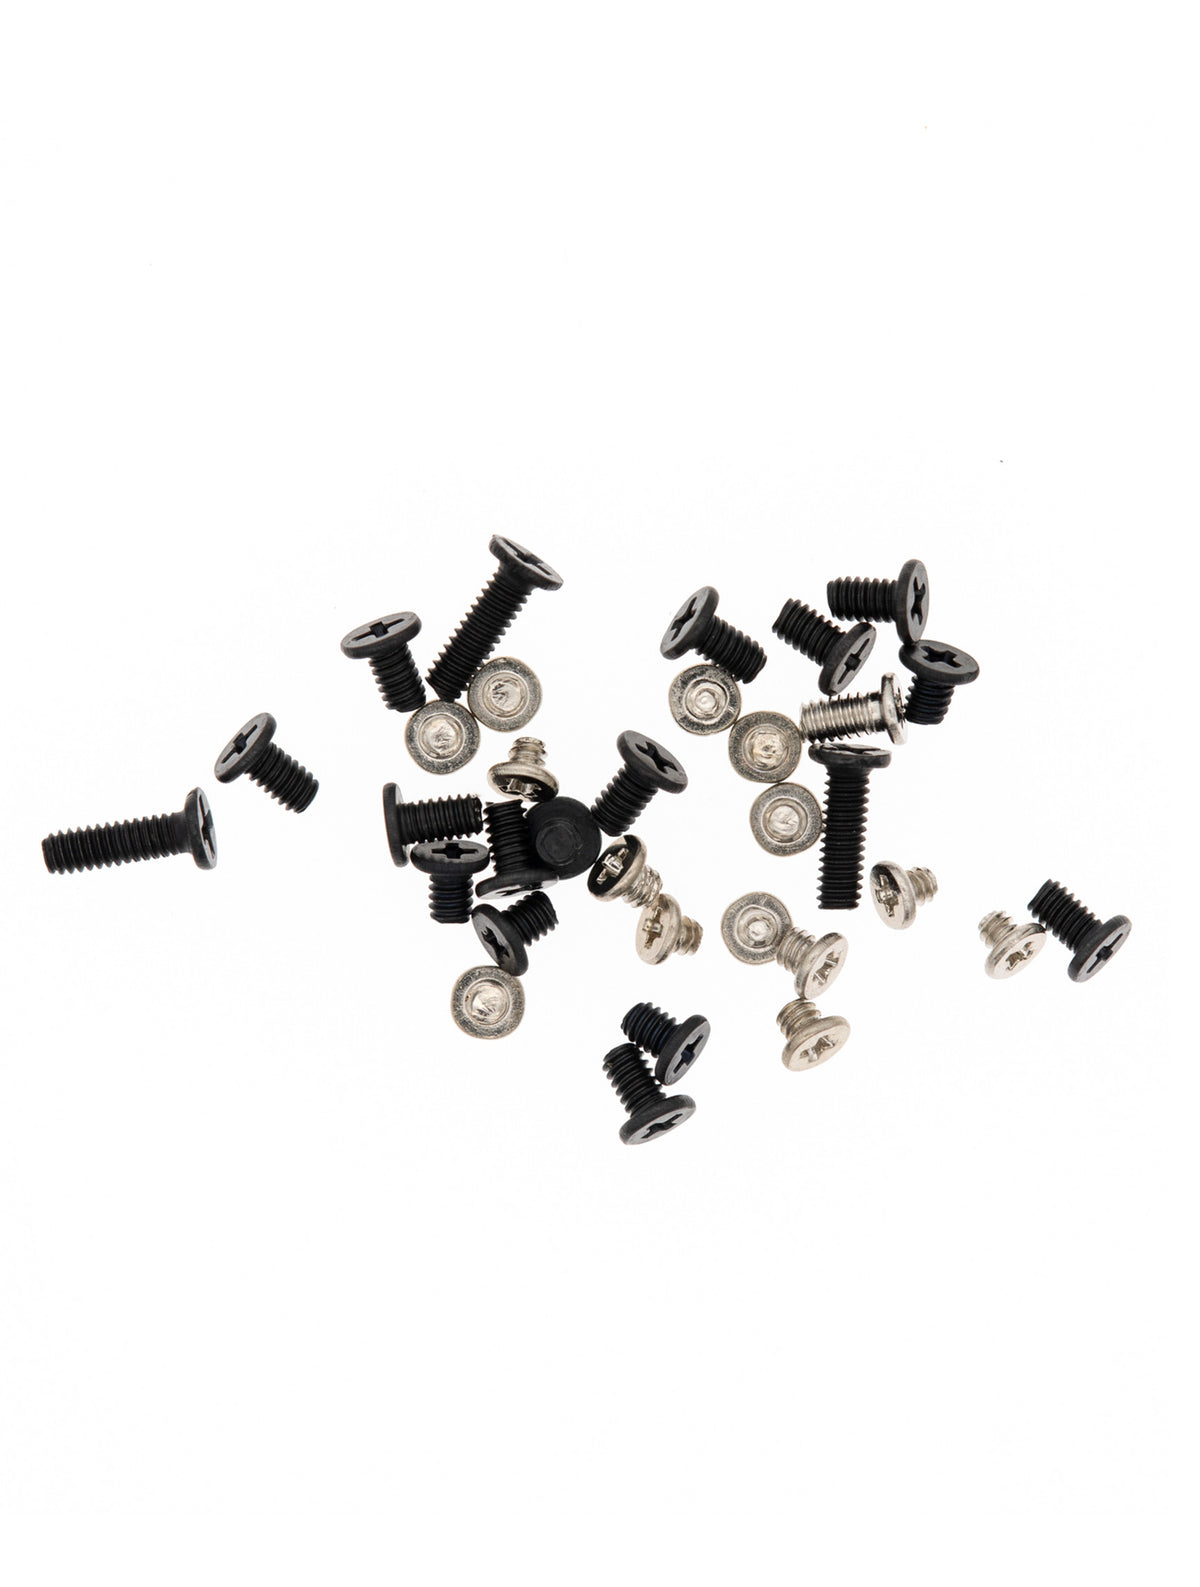 COMPLETE SCREW SET COMPATIBLE WITH IPAD PRO 10.5" 1ST